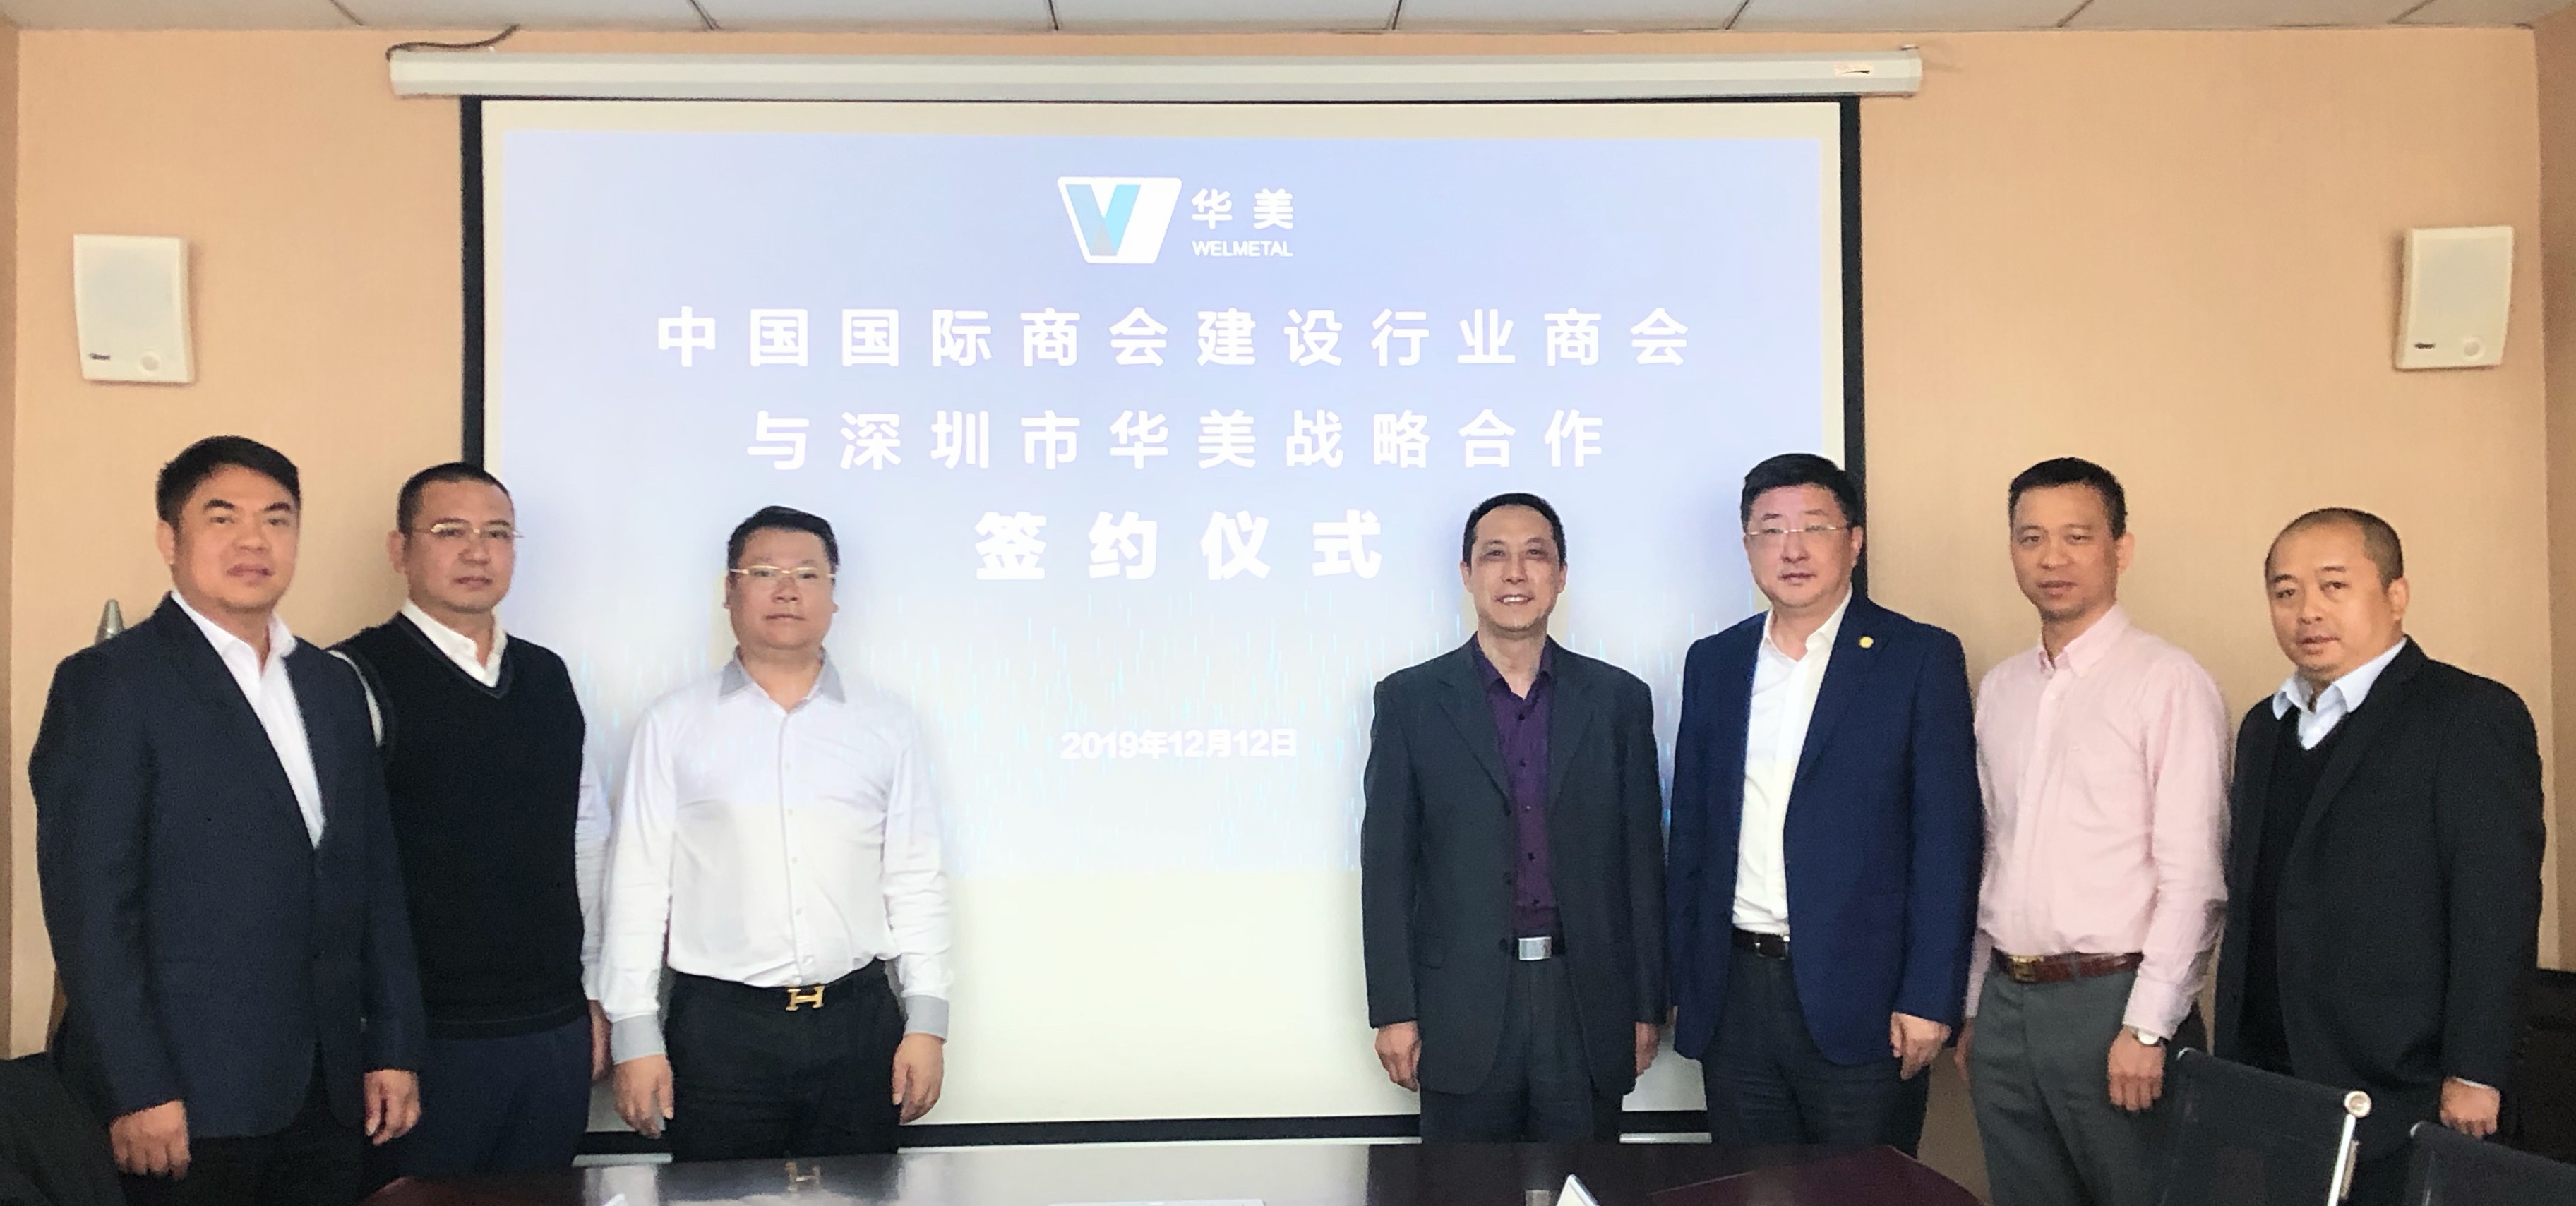 China Chamber of International Commerce Construction Industry Chamber of Commerce and Shenzhen Welmetal Investment Development Co., Ltd. signed a strategic cooperation agreement